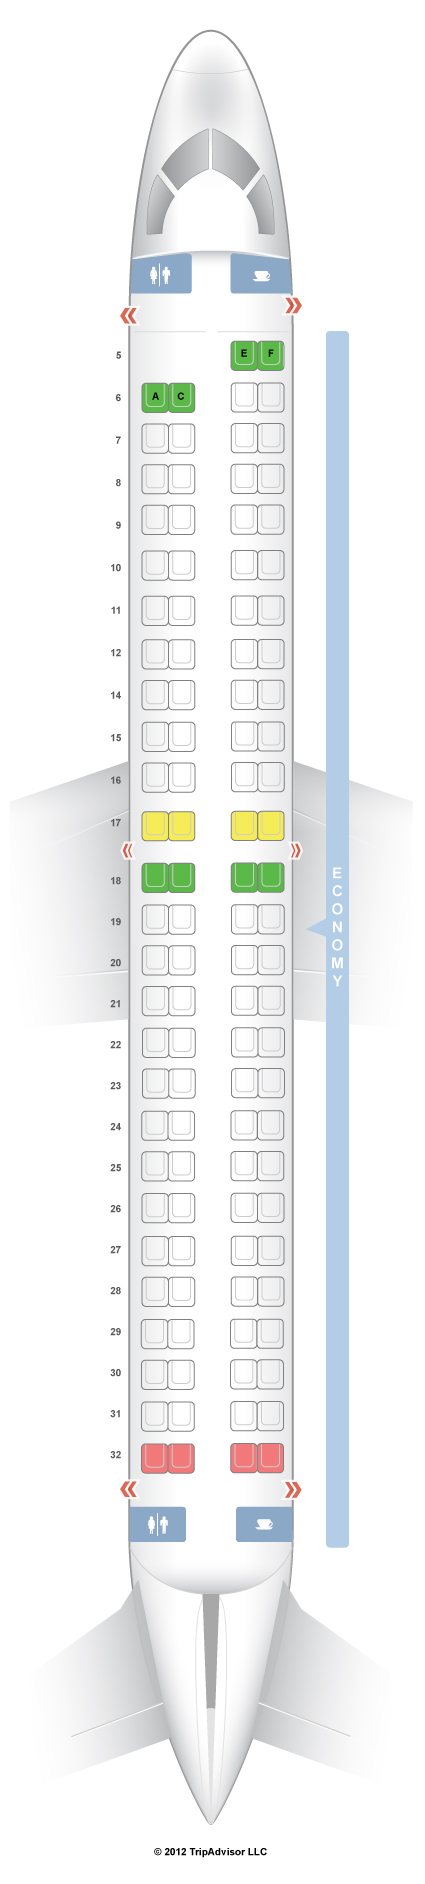 Copa Airlines Seating Chart